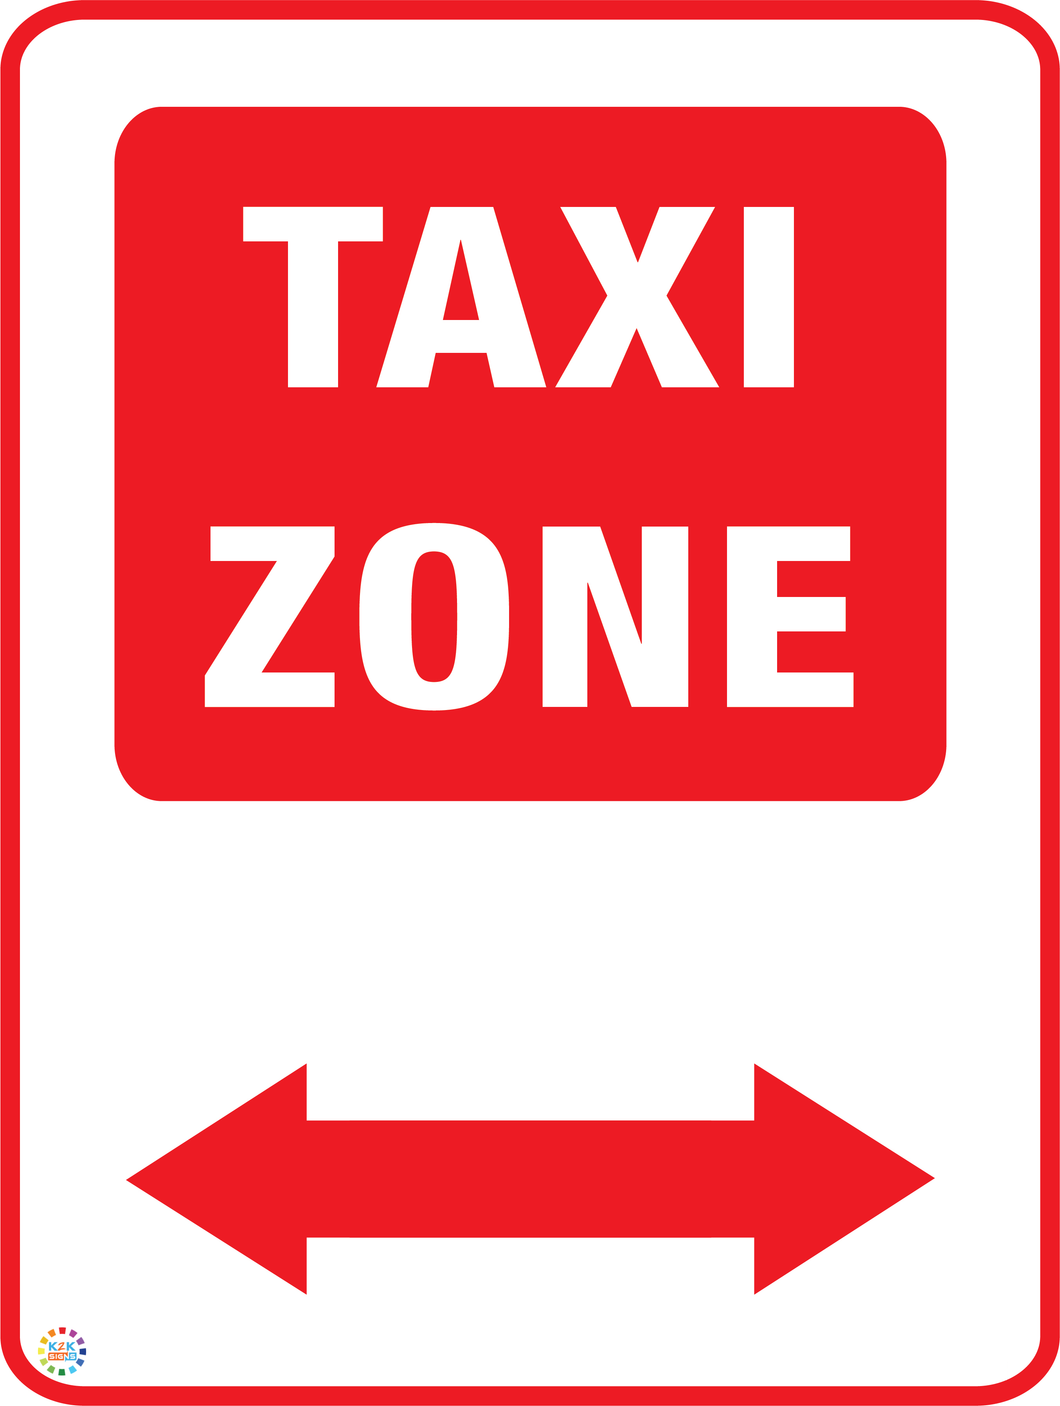 Taxi Zone (Two Way Arrow) Sign